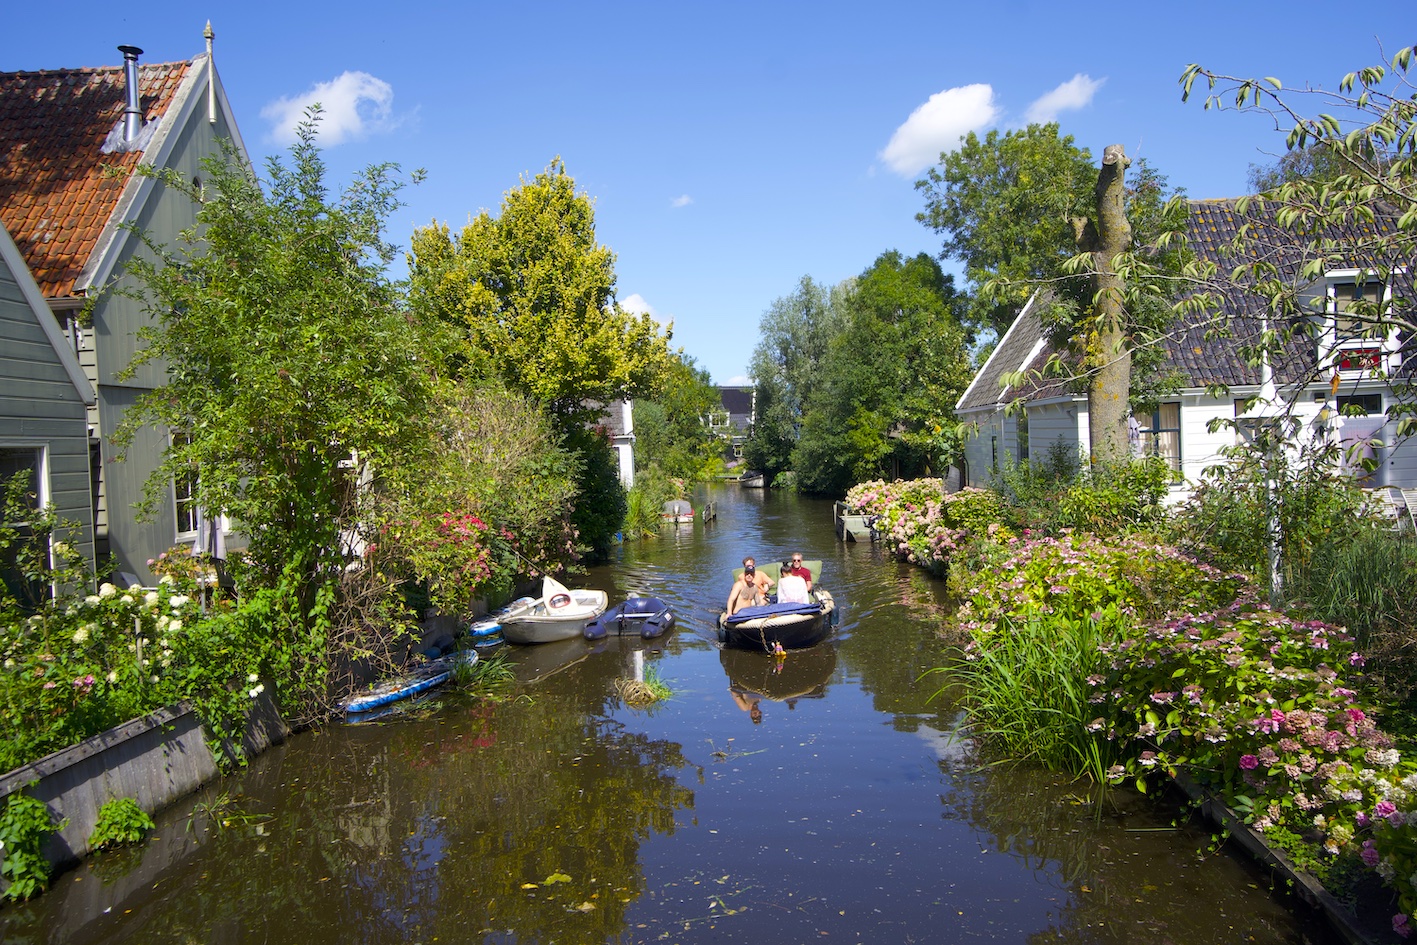 A view of one of the Broek in Waterland canals in the Summer time and some houses